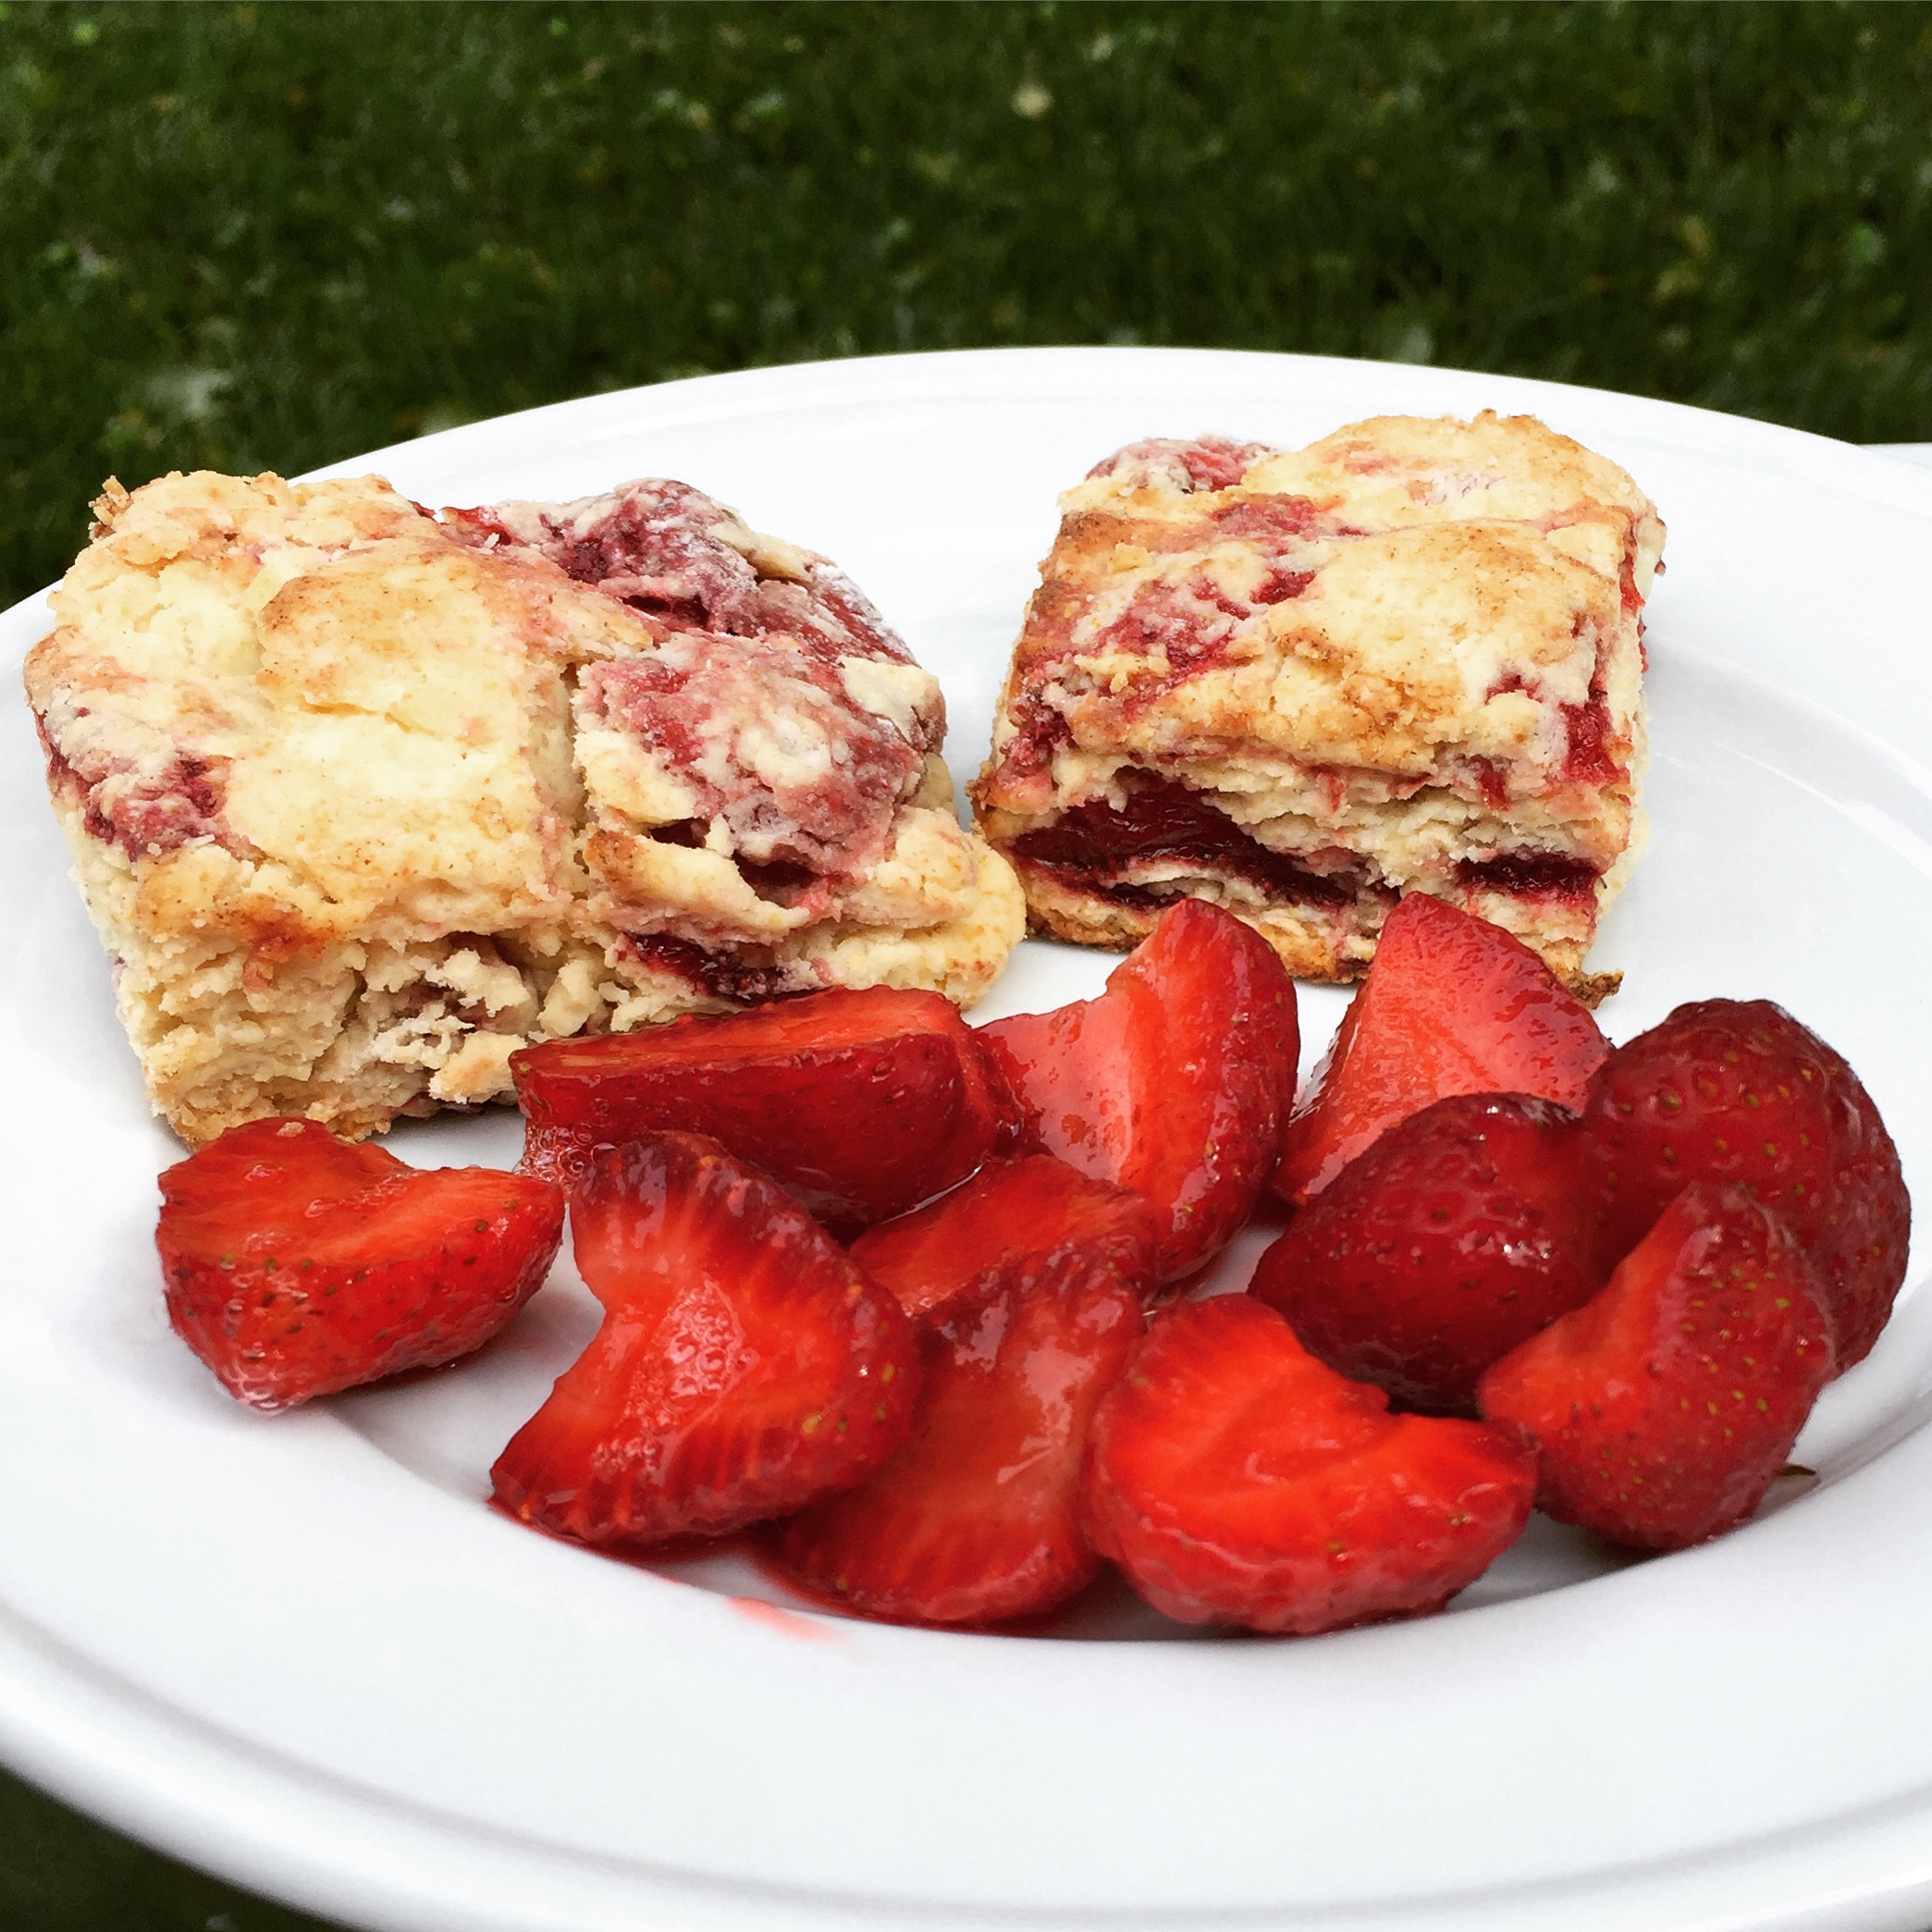 strawberries and cream biscuits with fresh berries